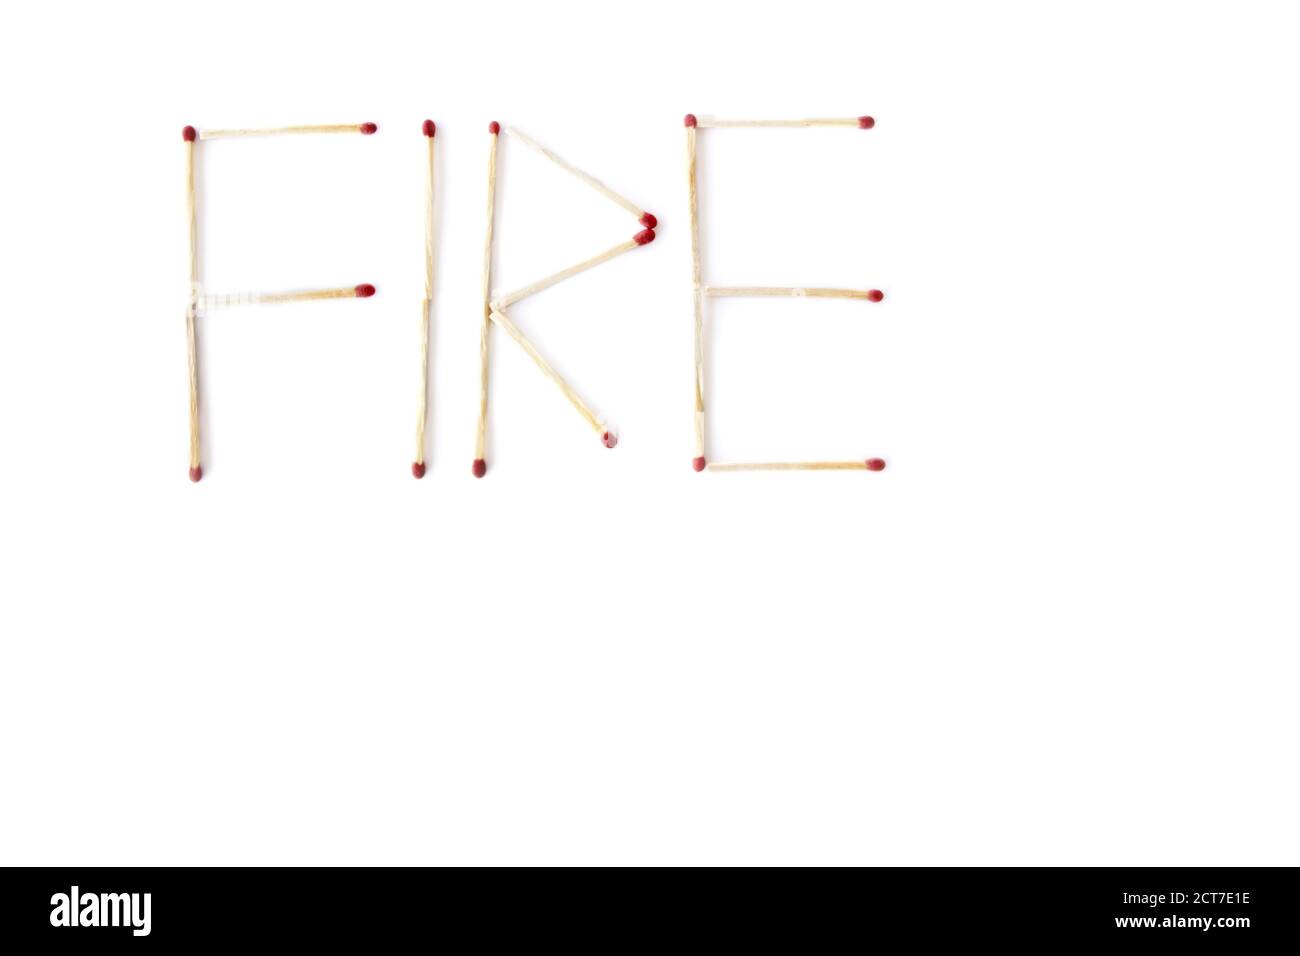 Word Fire written with matches Stock Photo